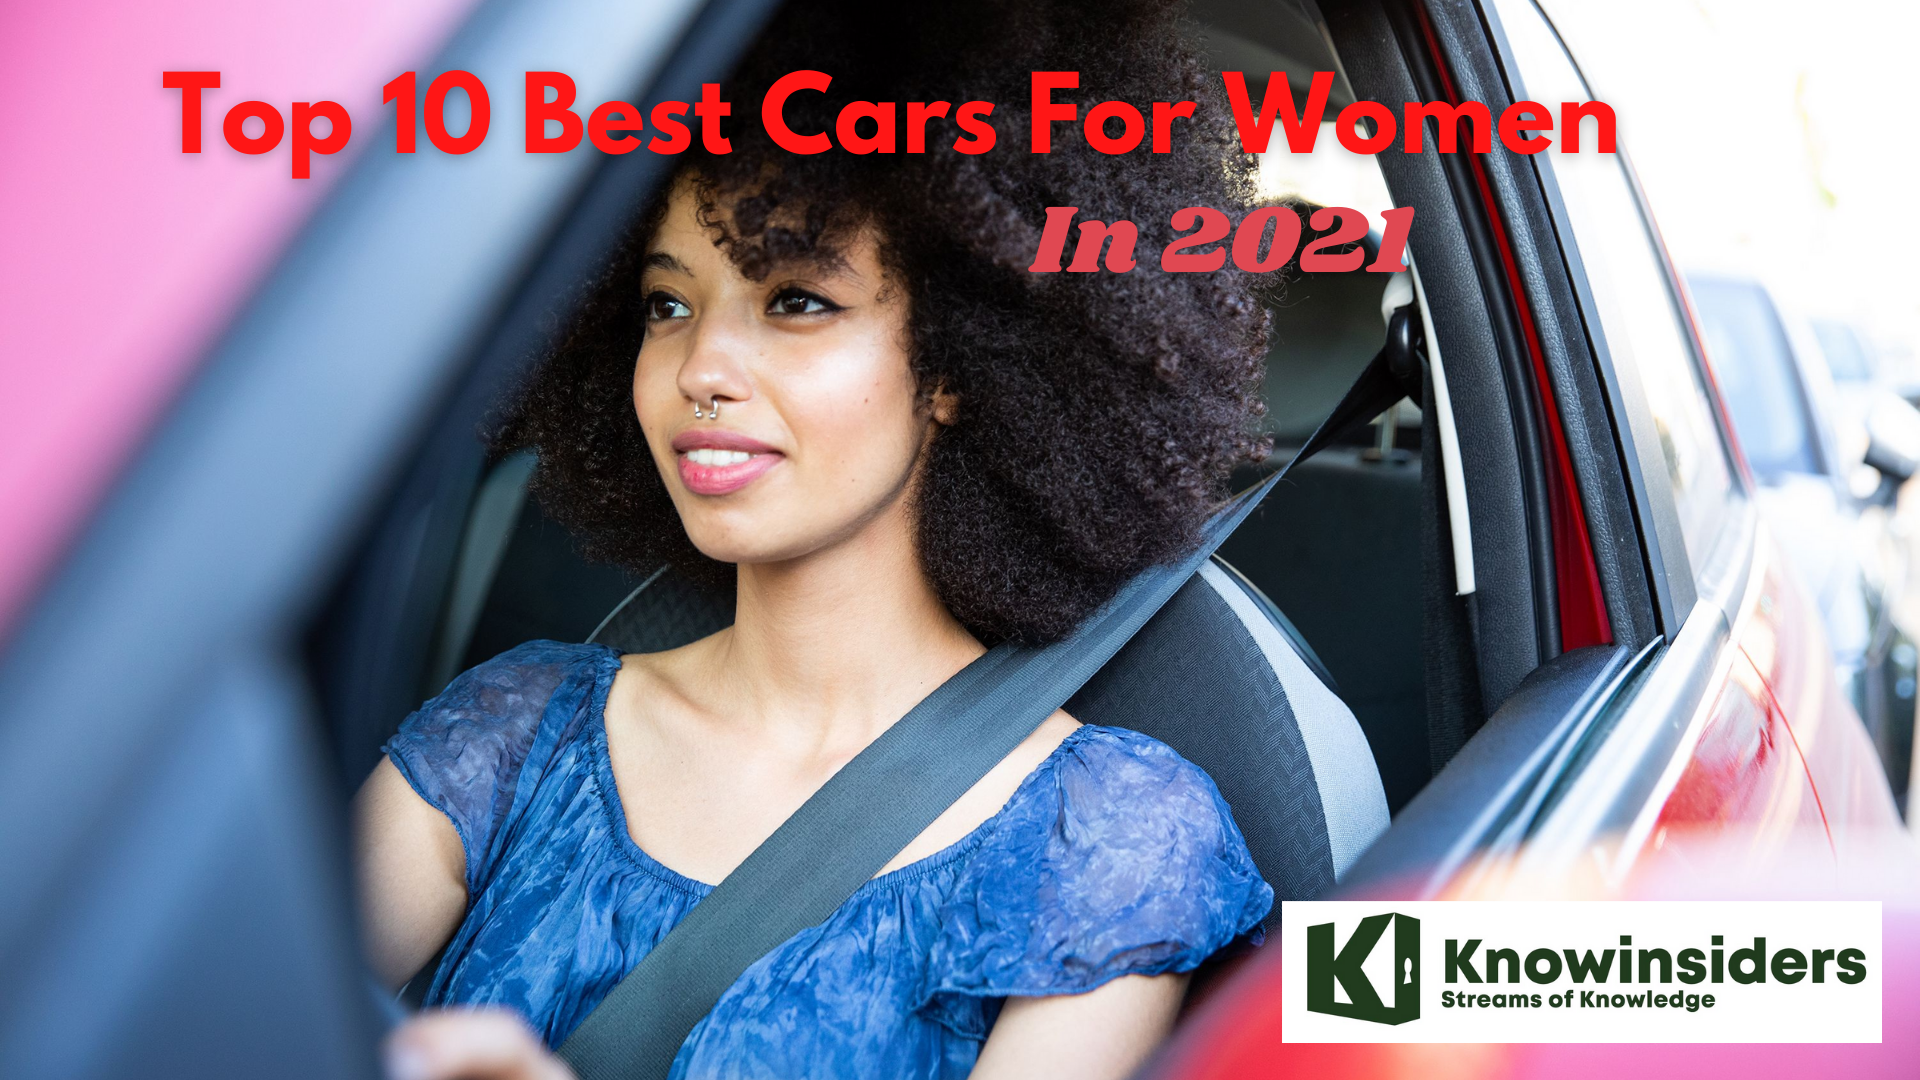 Top 10 Best Cars For Women in 2022/2023